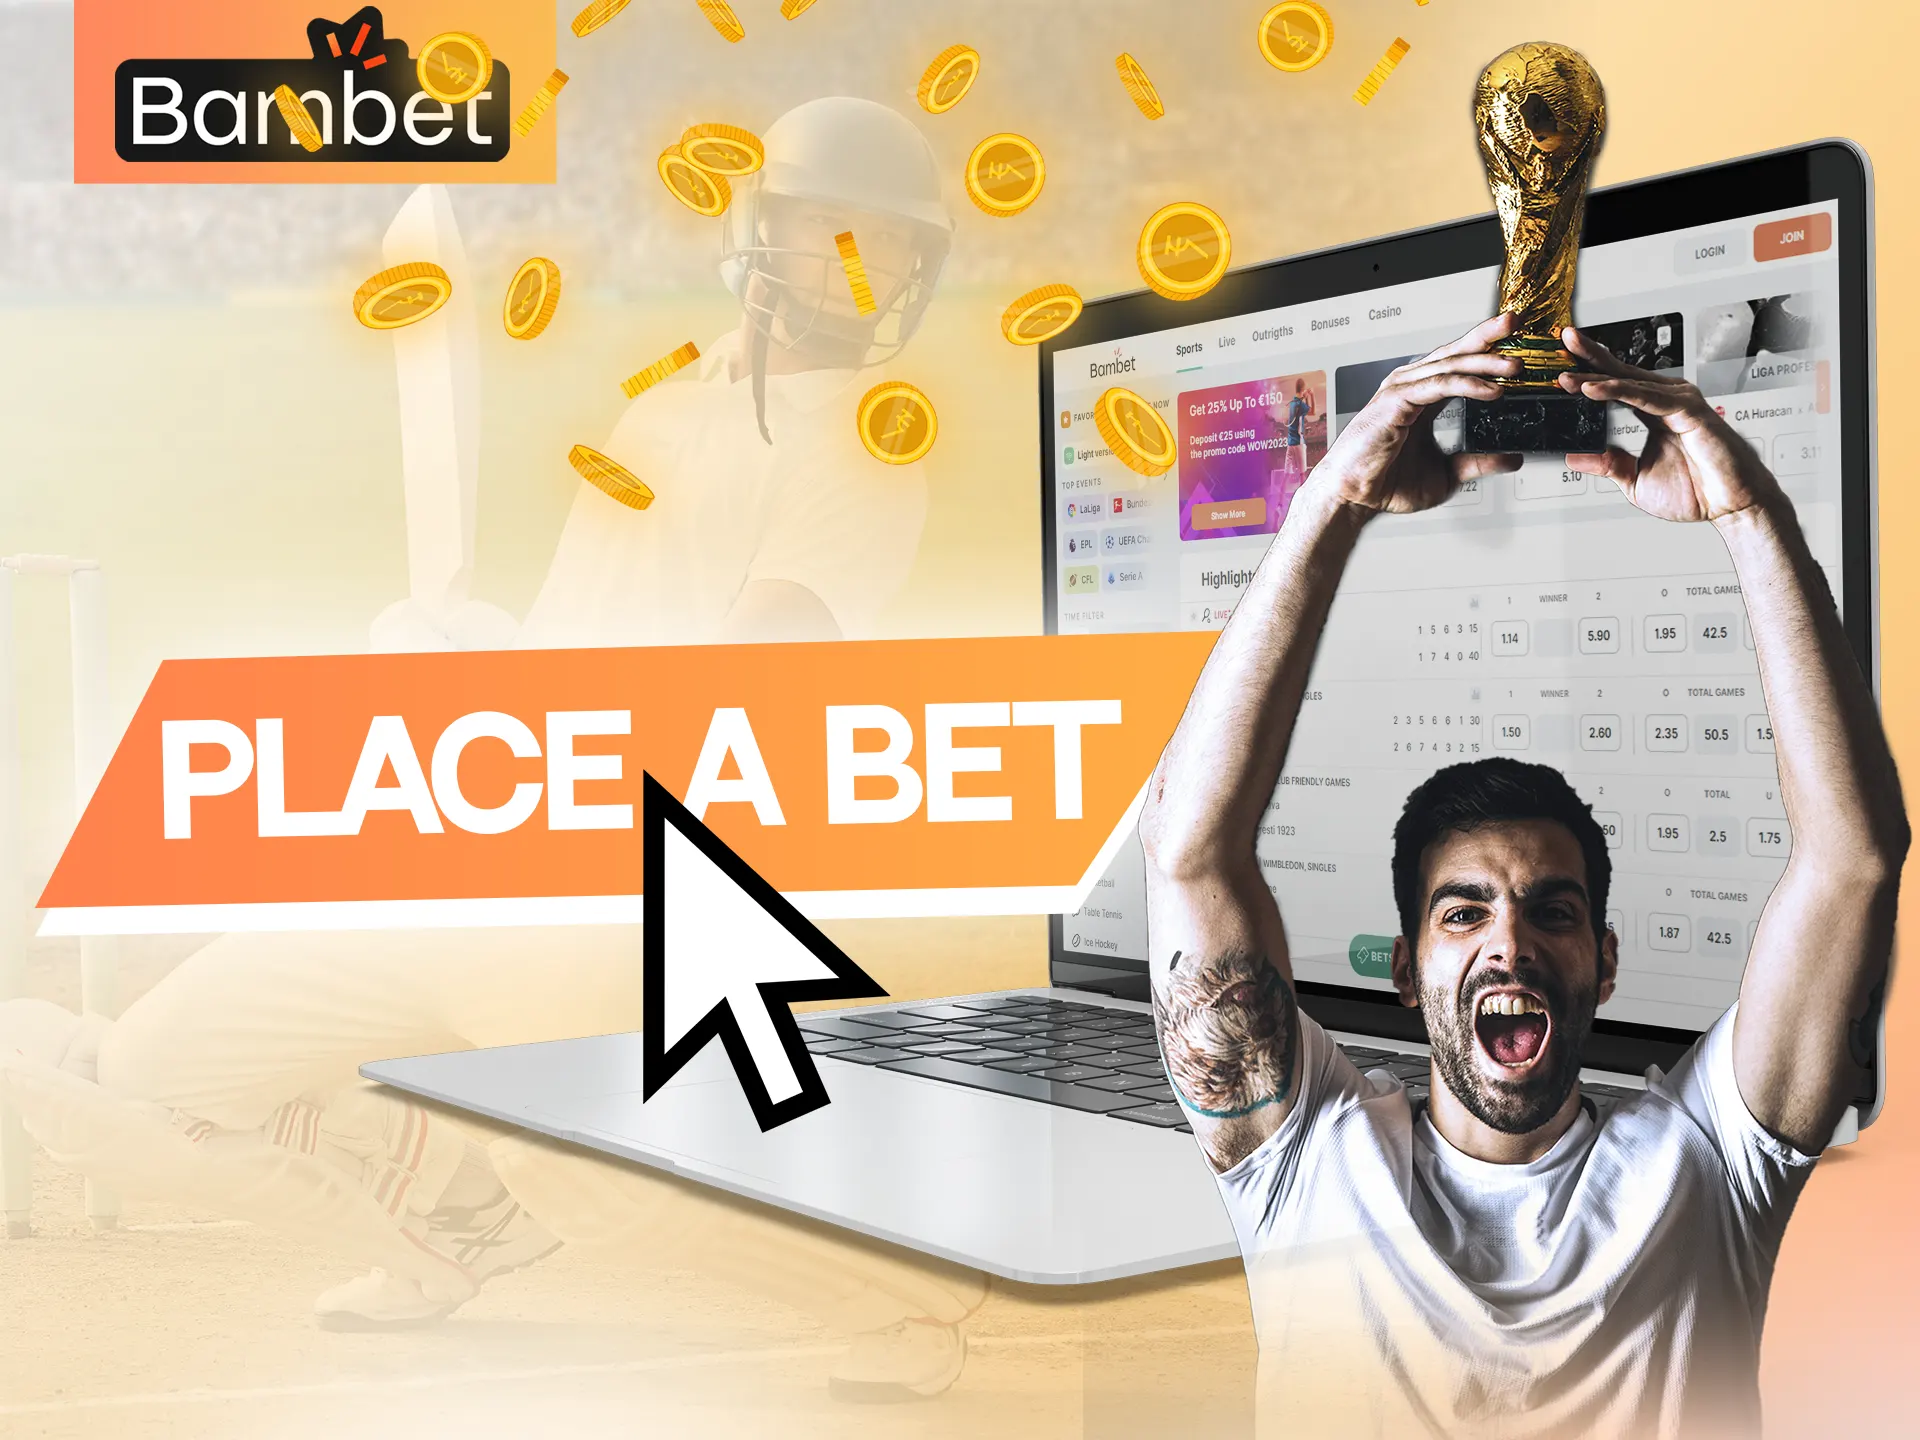 With this guide you will learn how to easily bet on sports on Bambet.